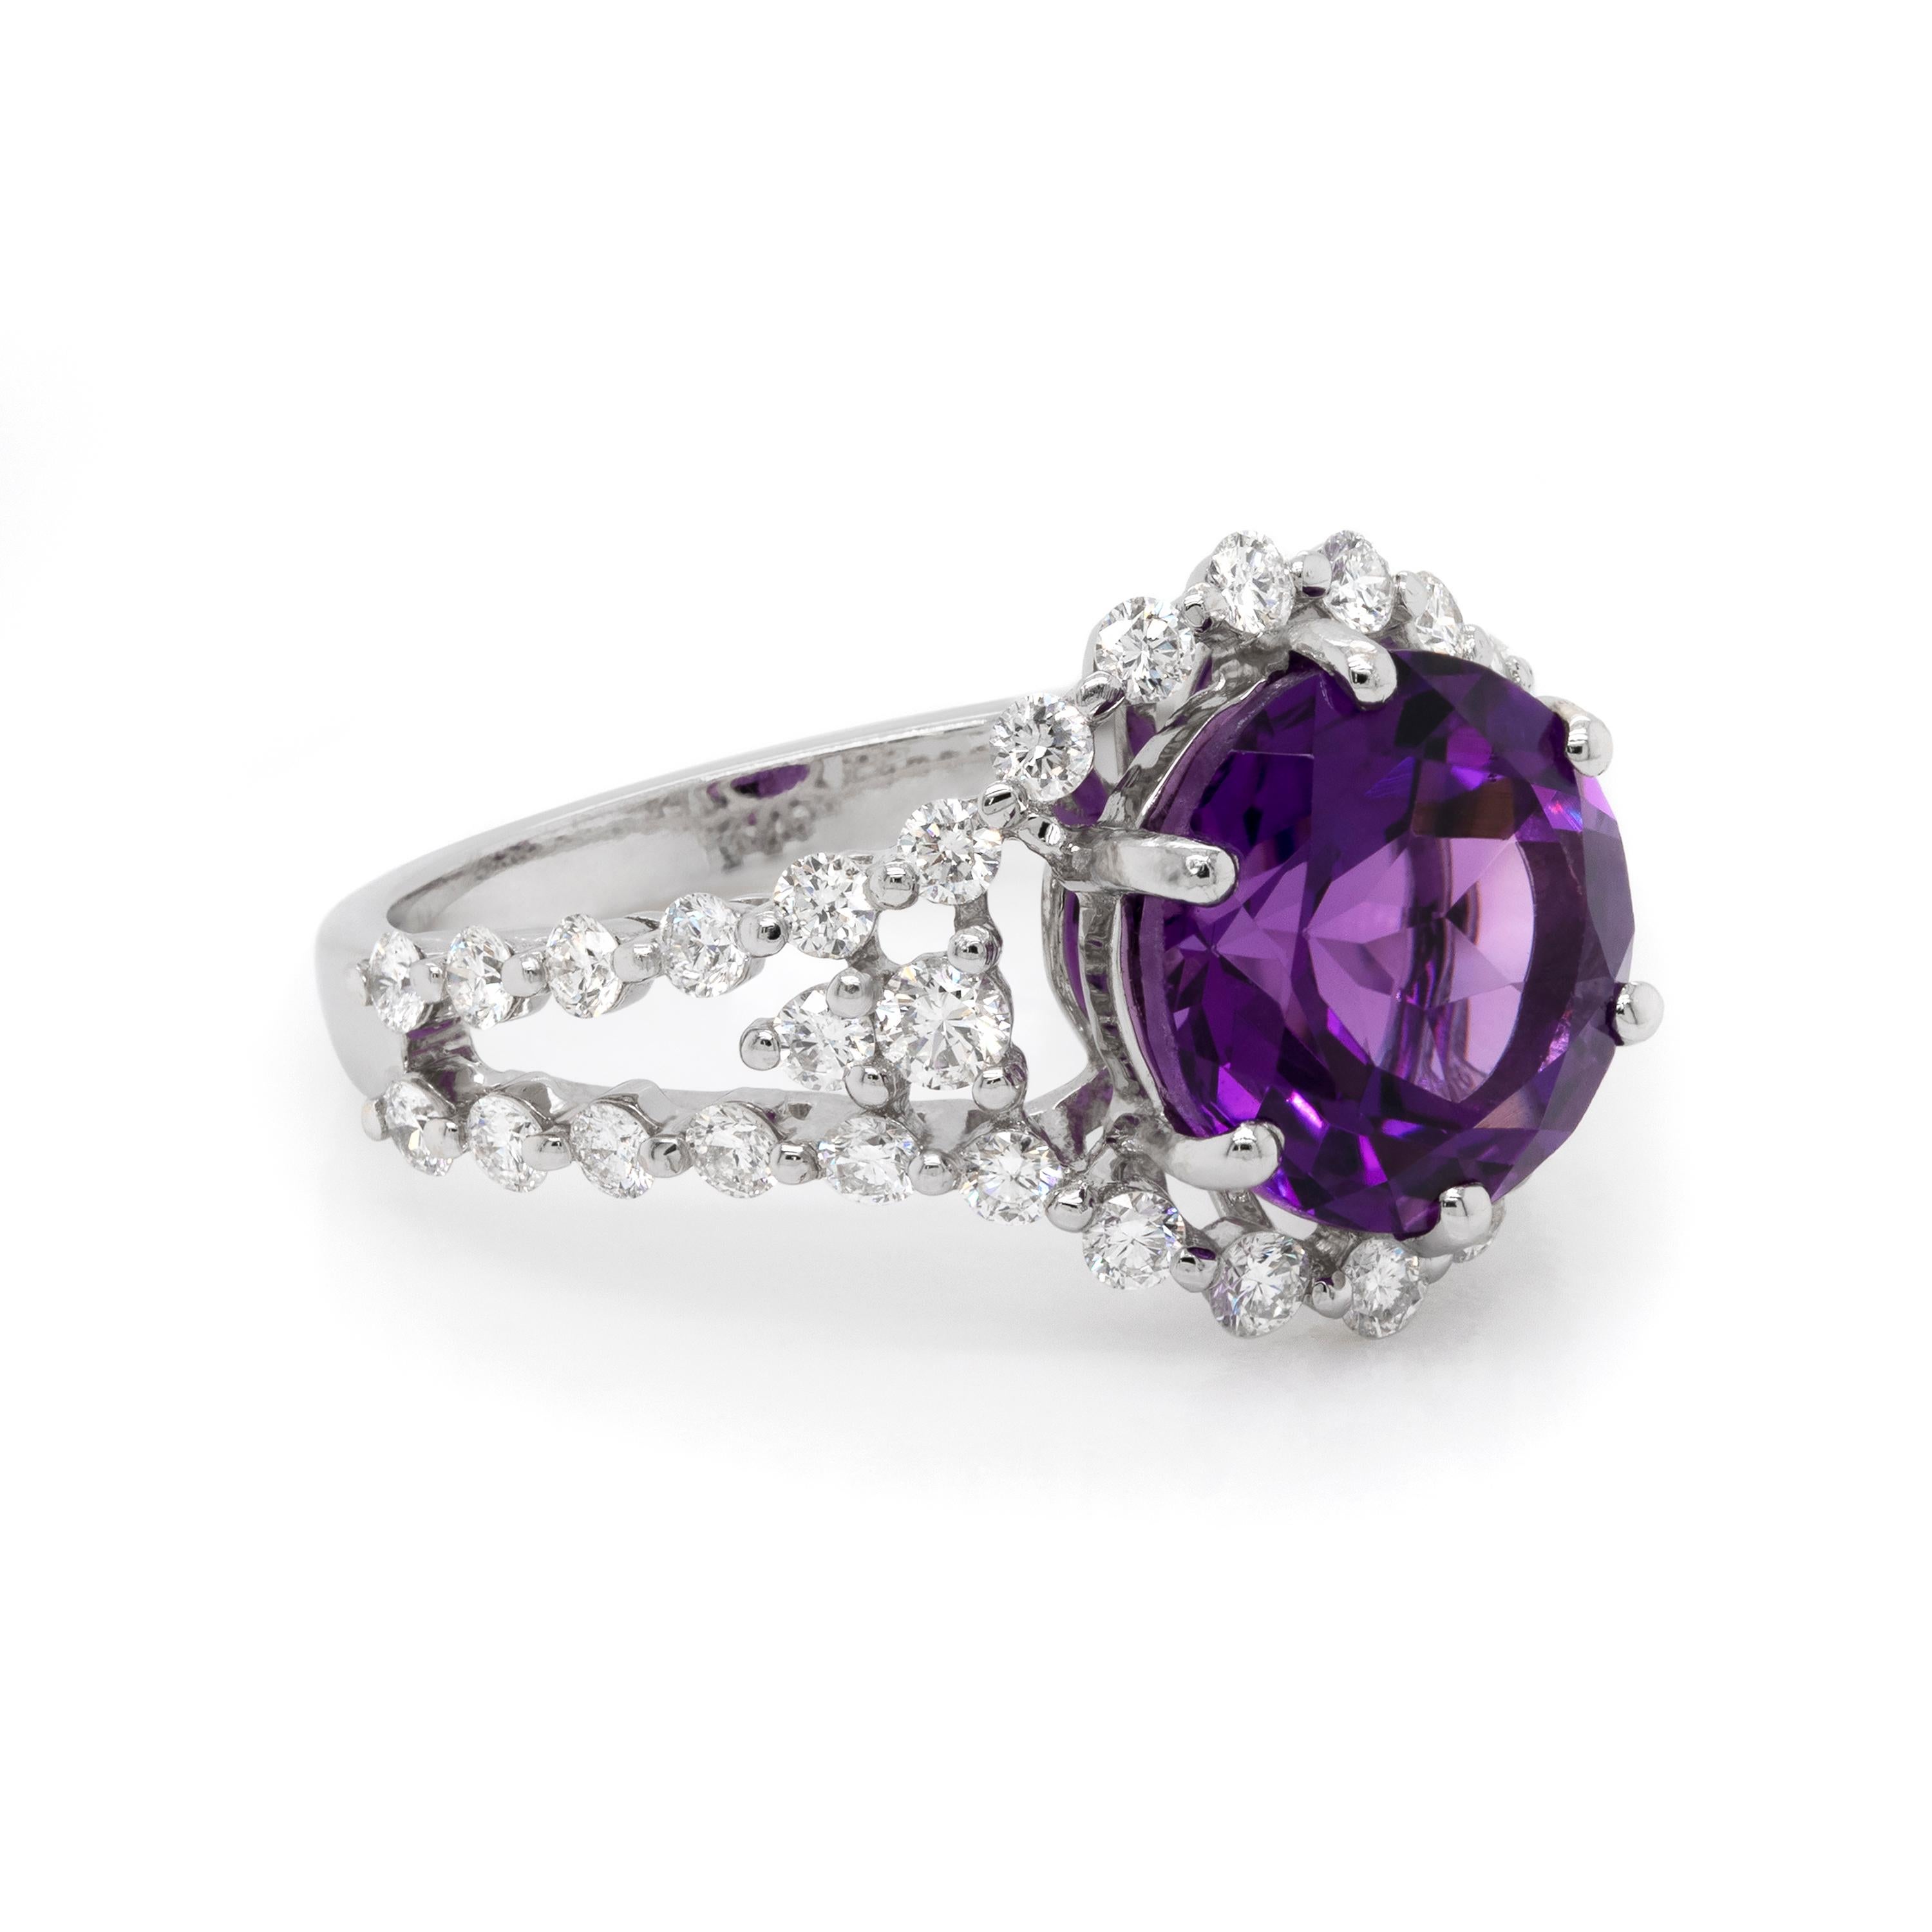 Beautiful dress ring featuring an impressive round shaped amethyst in the centre, weighing a total approximate weight of 3.00ct, mounted in a six claw, open back setting. The amethyst is embellished by a claw set halo of round brilliant cut diamonds